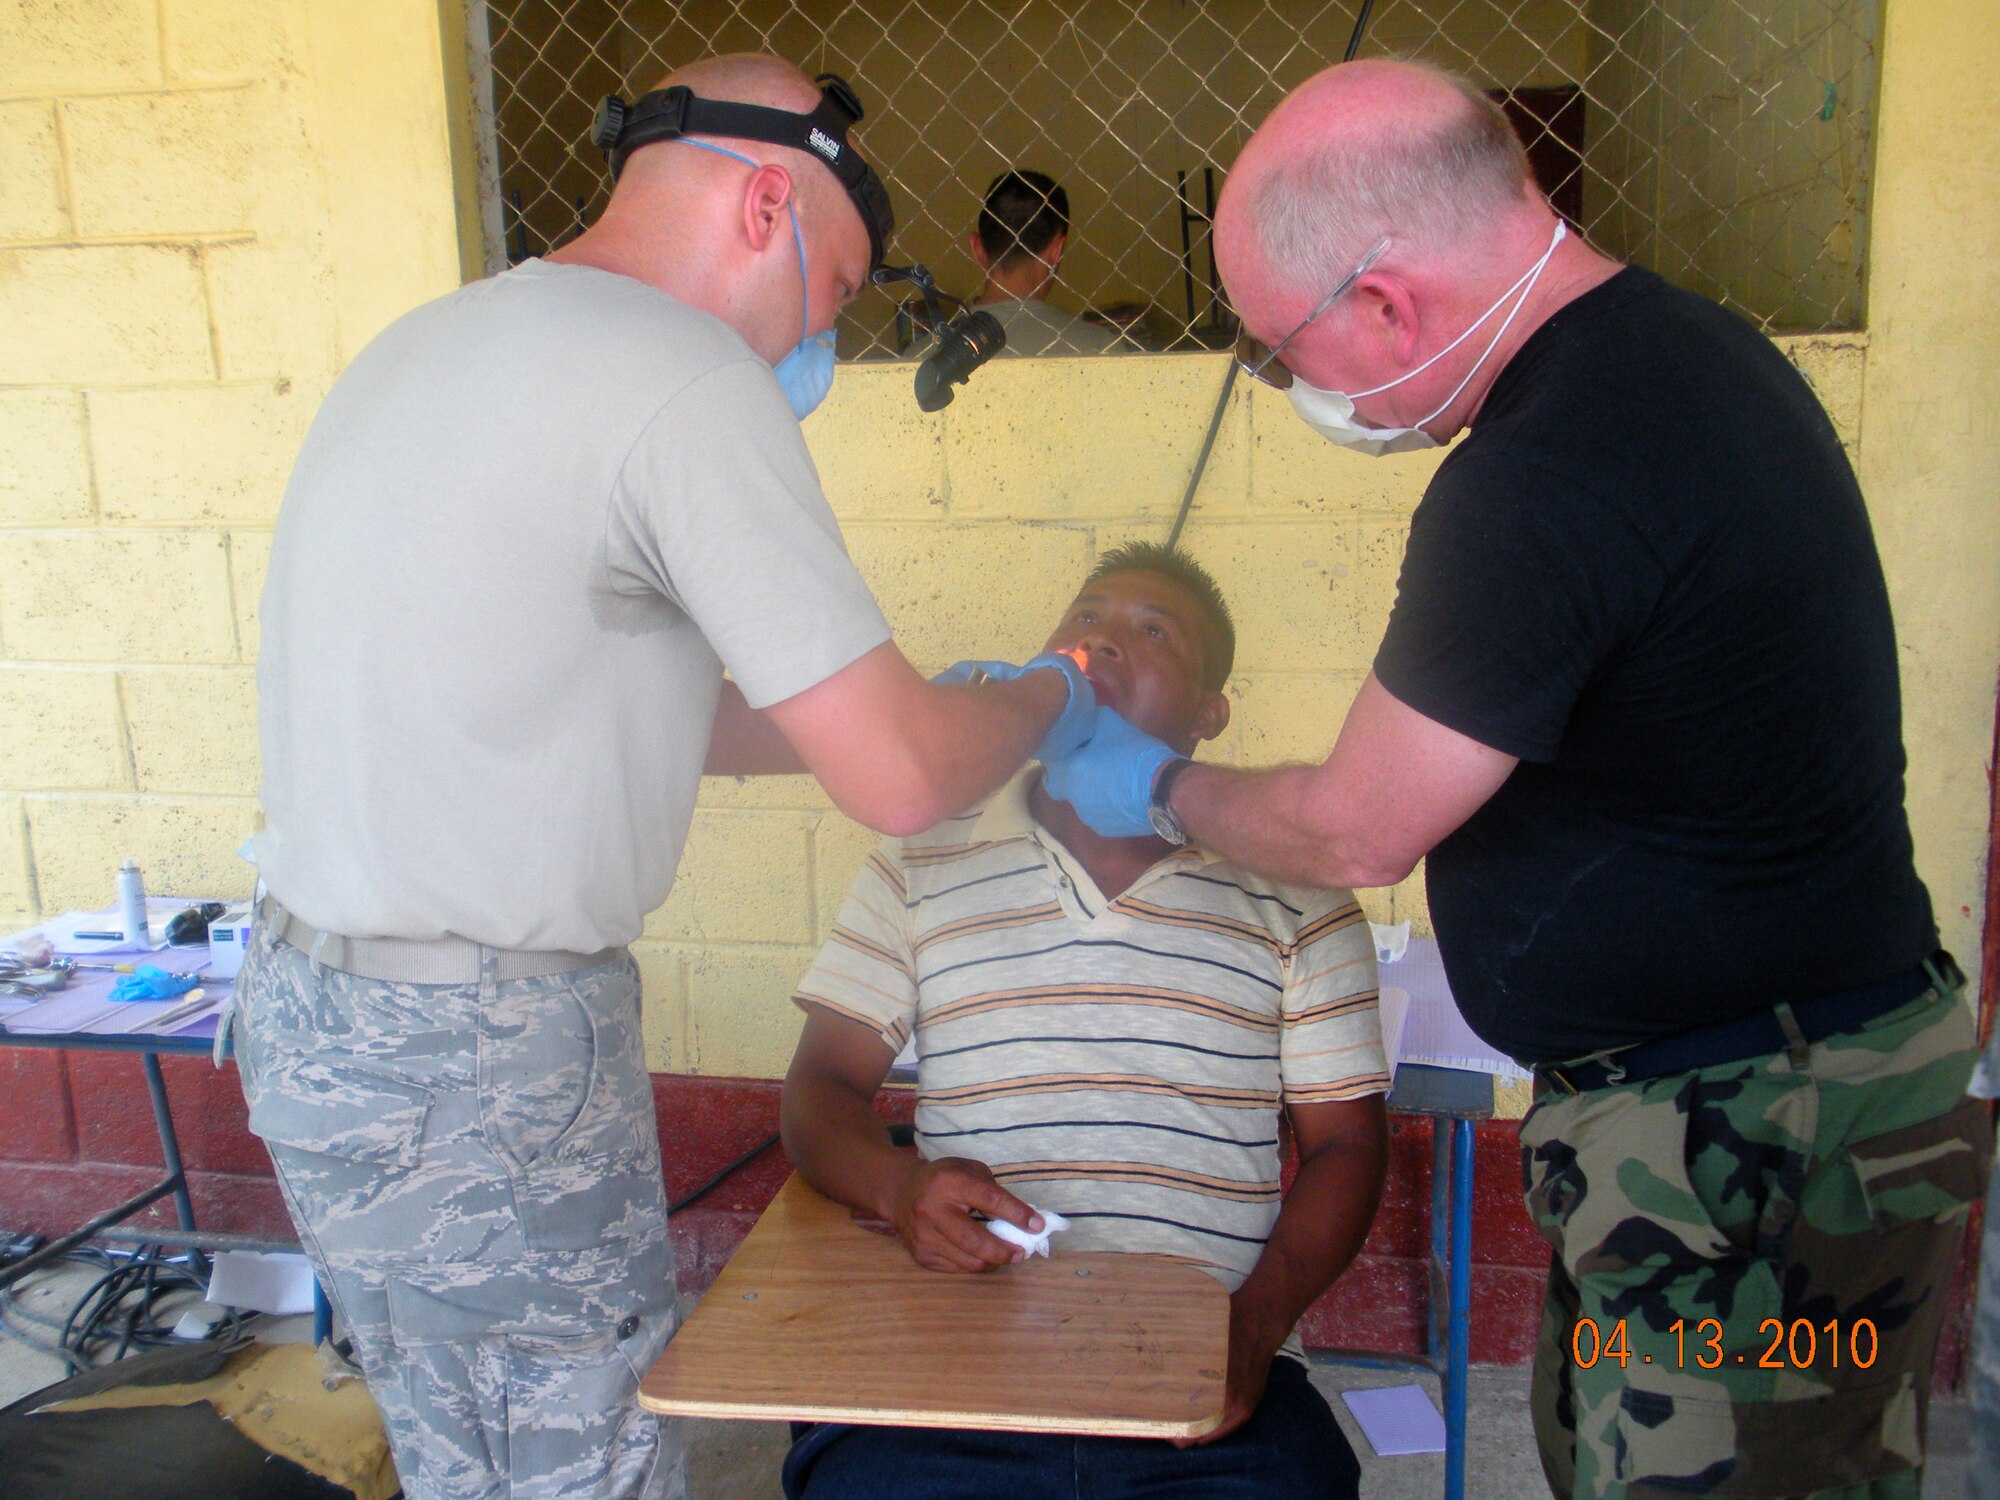 Master Sgt. Neil Neisner, 173rd Medical Group Independent Duty Medical Technician, and Lt. Col. Philip Bales, 173rd MDG Dentist, prepare to remove a tooth from a patient in Puerto Barrios, Guatemala during the Beyond Horizon's exercise April 12, 2010.  Twenty three personnel from the 173rd MDG deployed to Guatemala in support of this exercise which is designed to bring basic medical, dental and optical care to communities in need.   (U.S. Air Force Photo by Unknown)